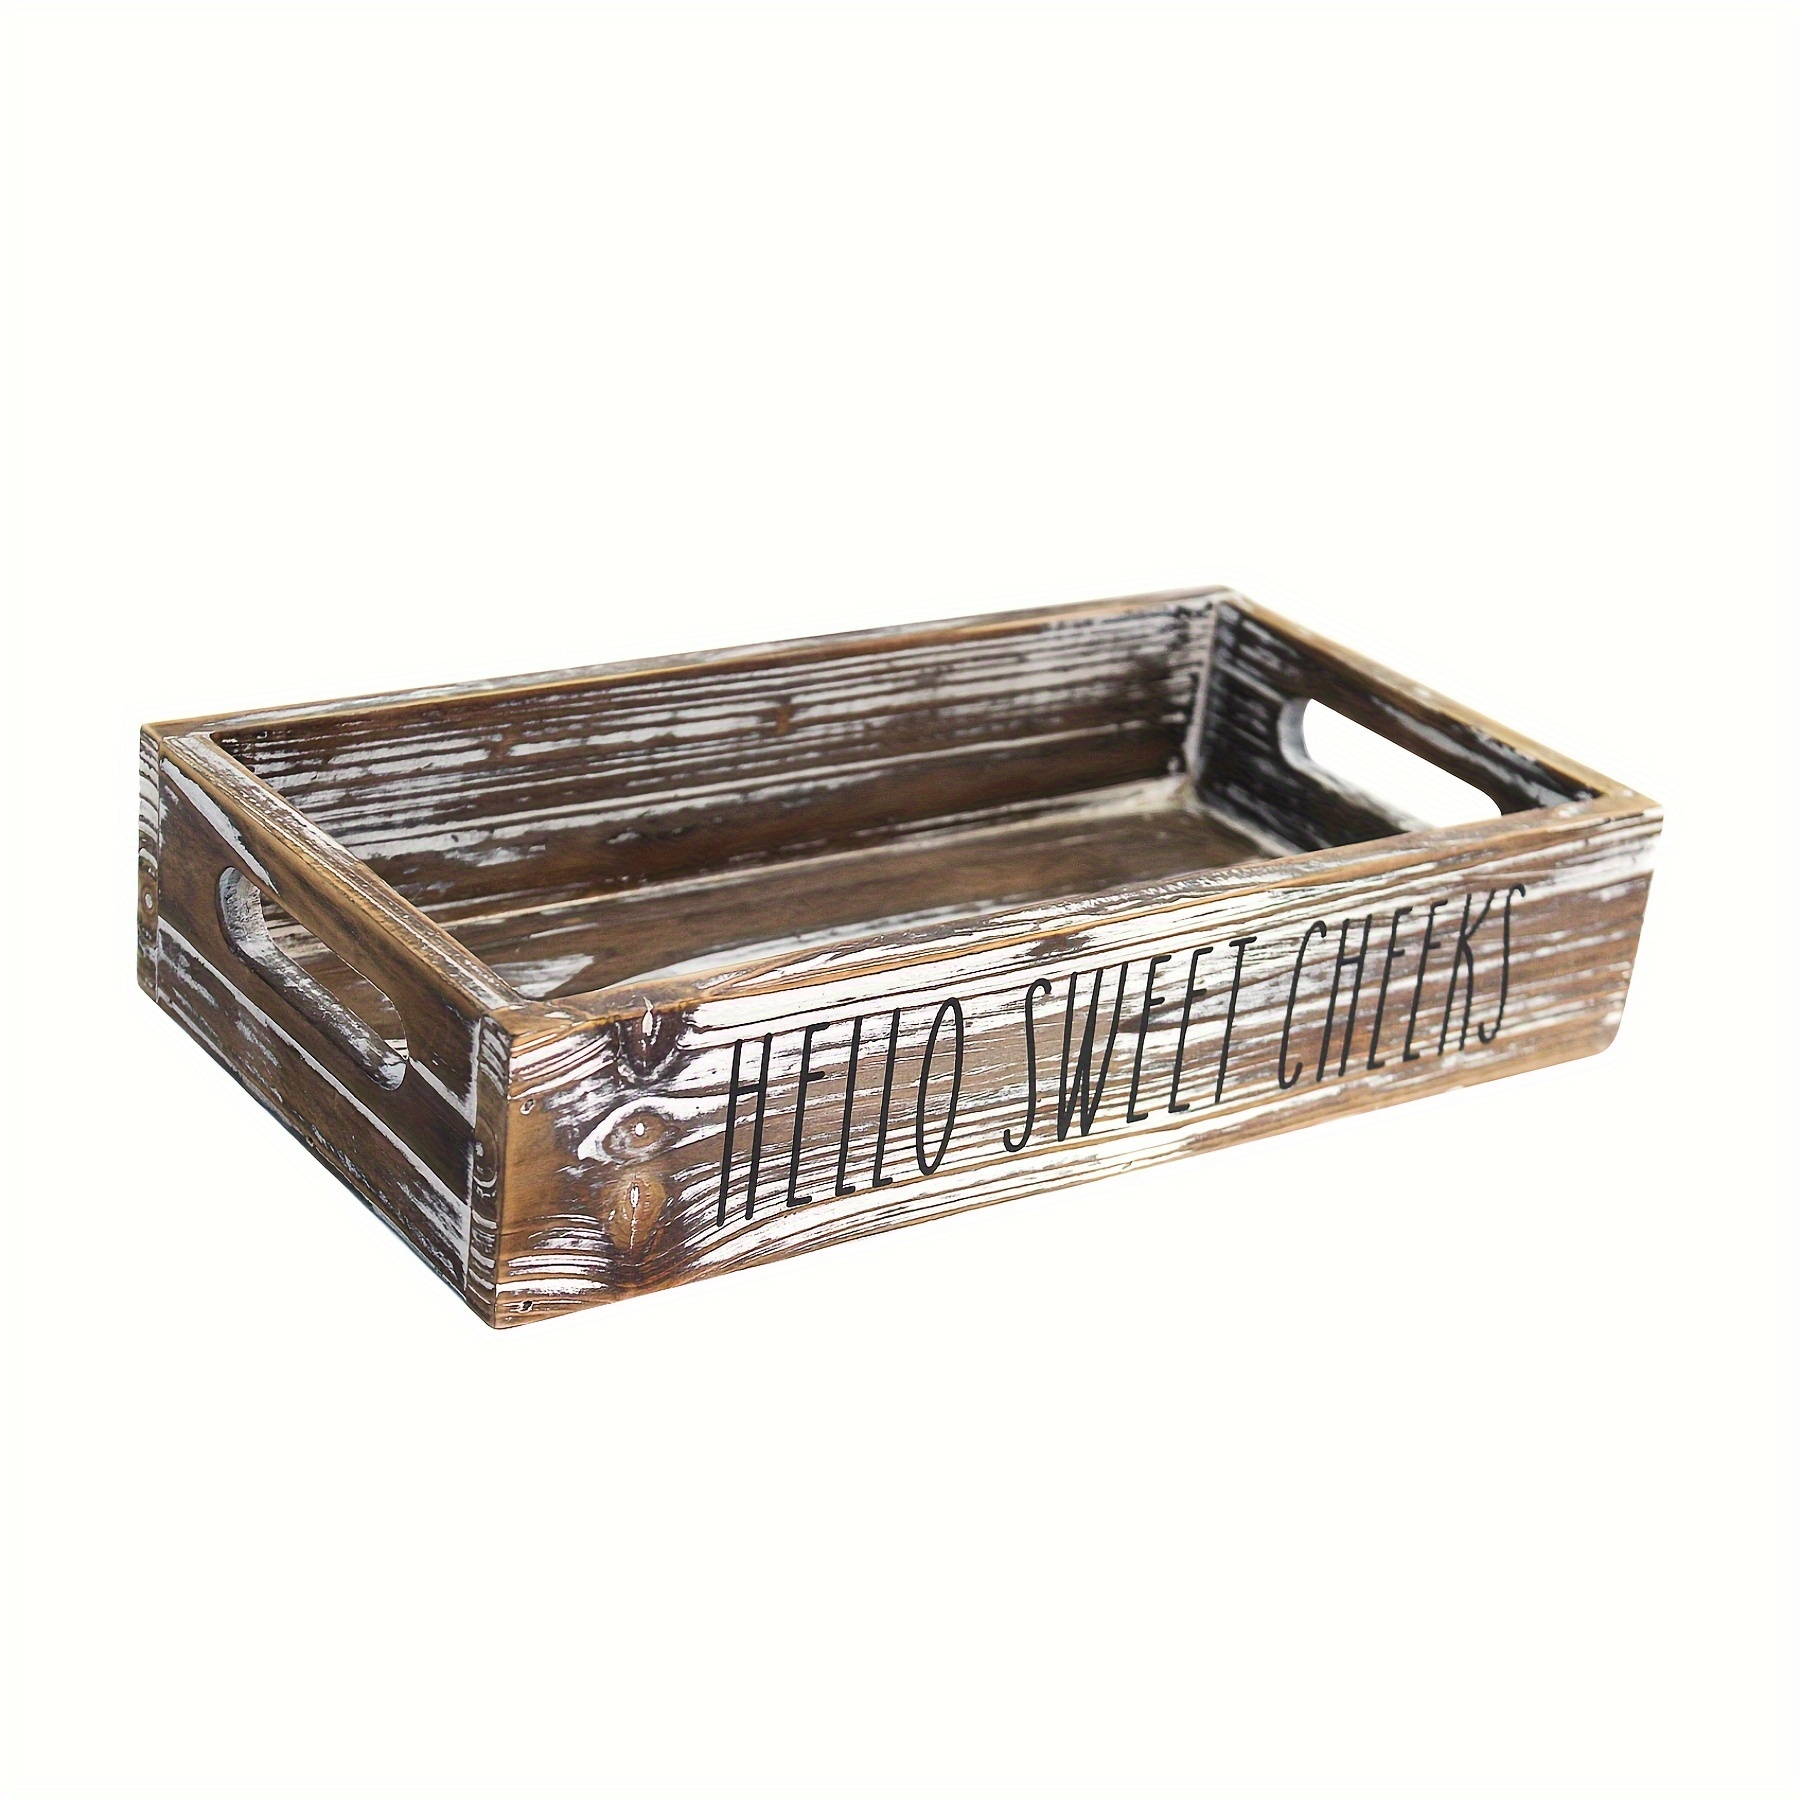 Large Rustic Wooden Storage Box With Rope Handles Reclaimed